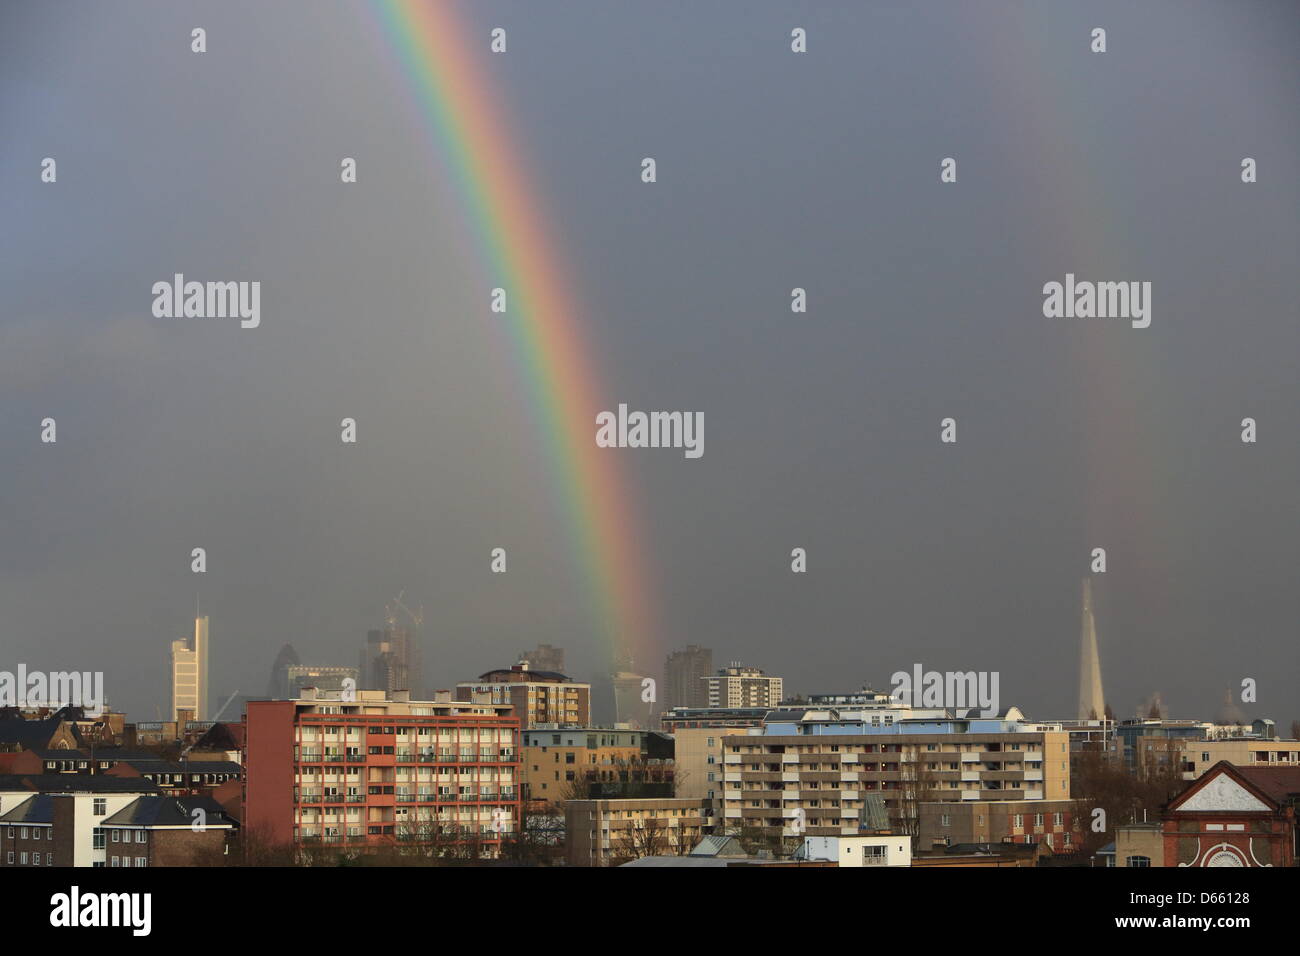 London, UK. Friday 12th, 2013. A double rainbow appears during a heavy April shower over the City in London. Credit: Monica Wells/Alamy Live News Stock Photo